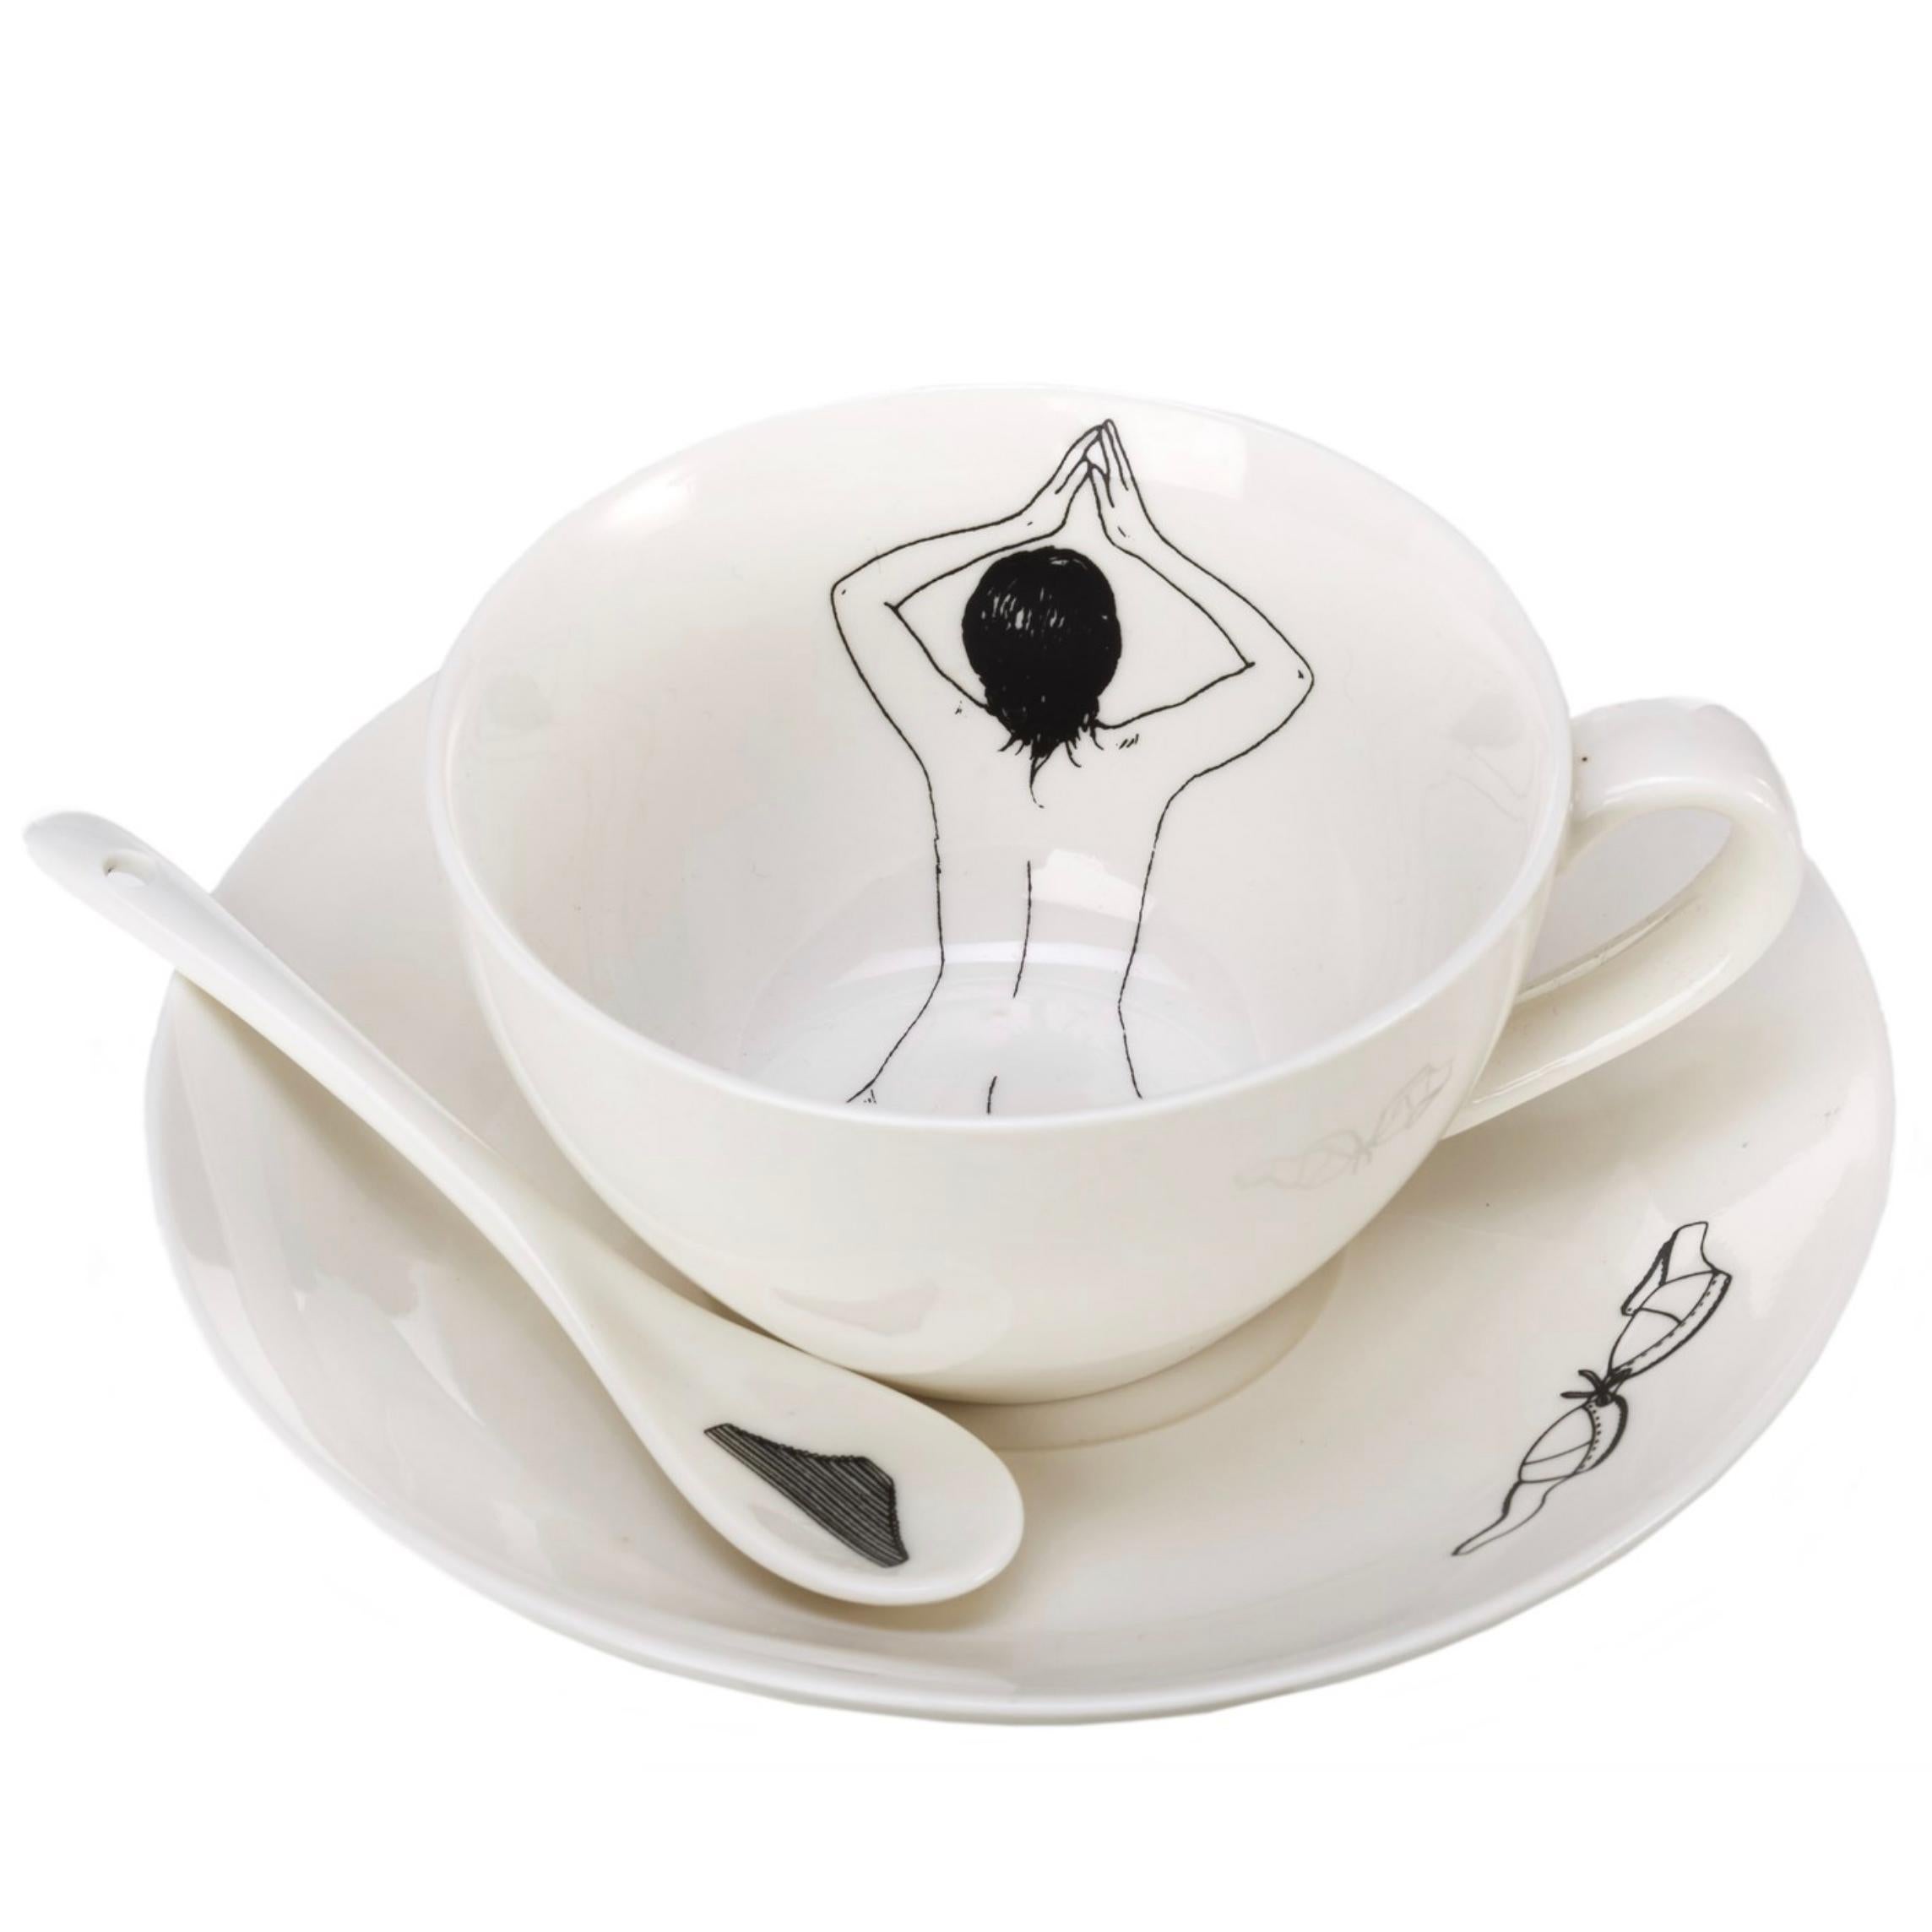 The undressed tea set was designed and handcrafted in the Netherlands by Esther Hörchner. Each cup features a line illustration of a nude woman in different positions as if bathing in the tea or coffee. The set is made complete with four spoons with